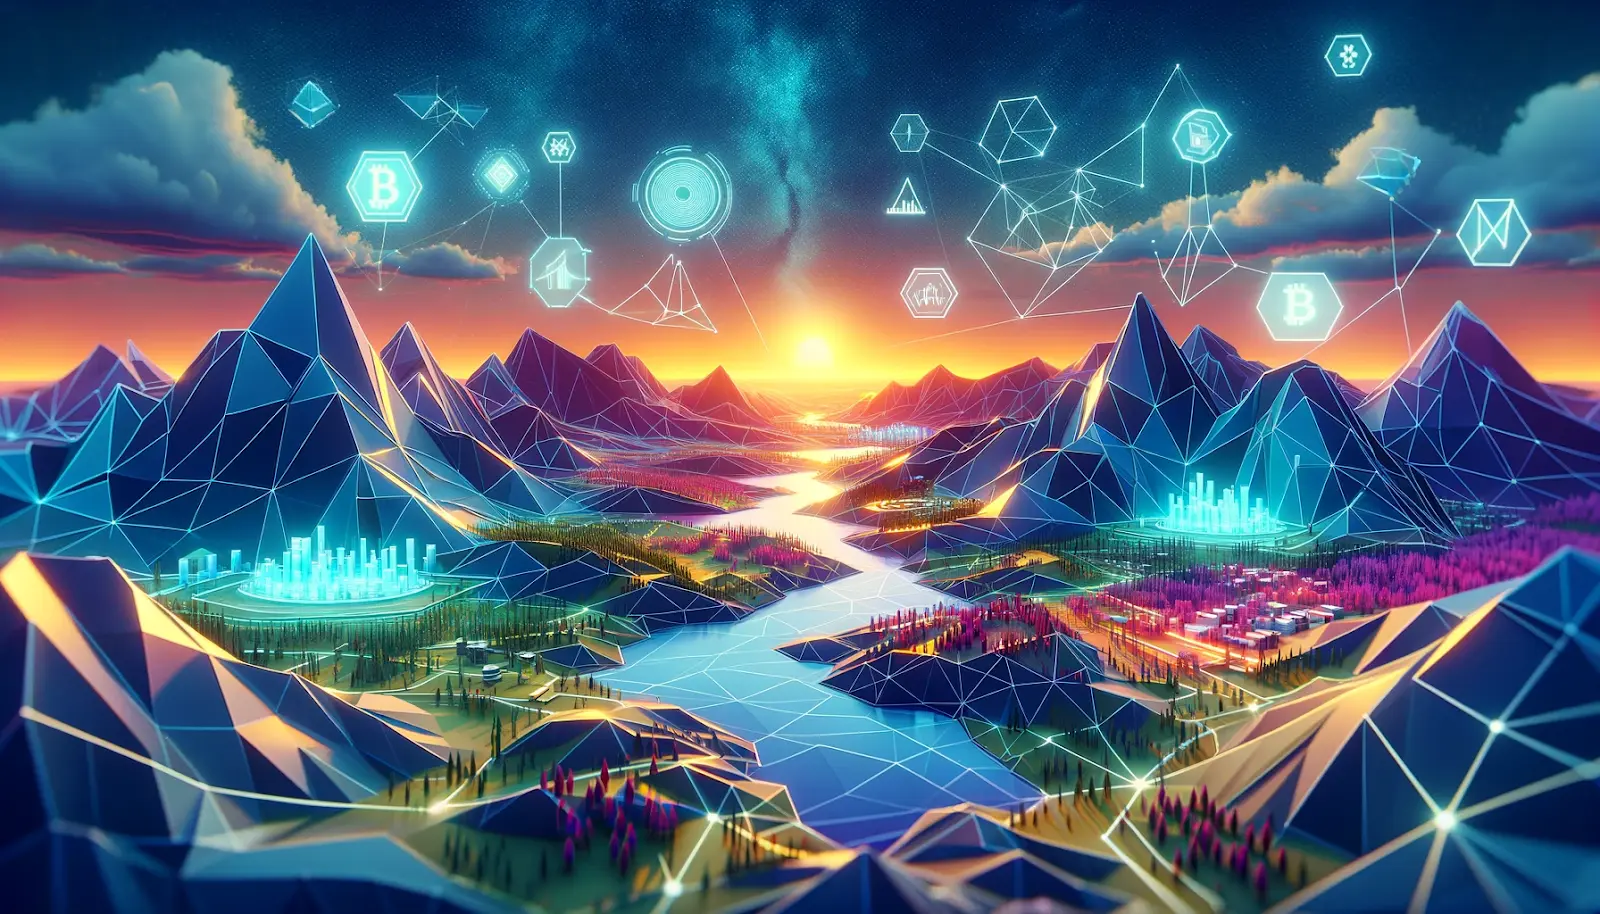  Low-poly mountains and asset tokenization